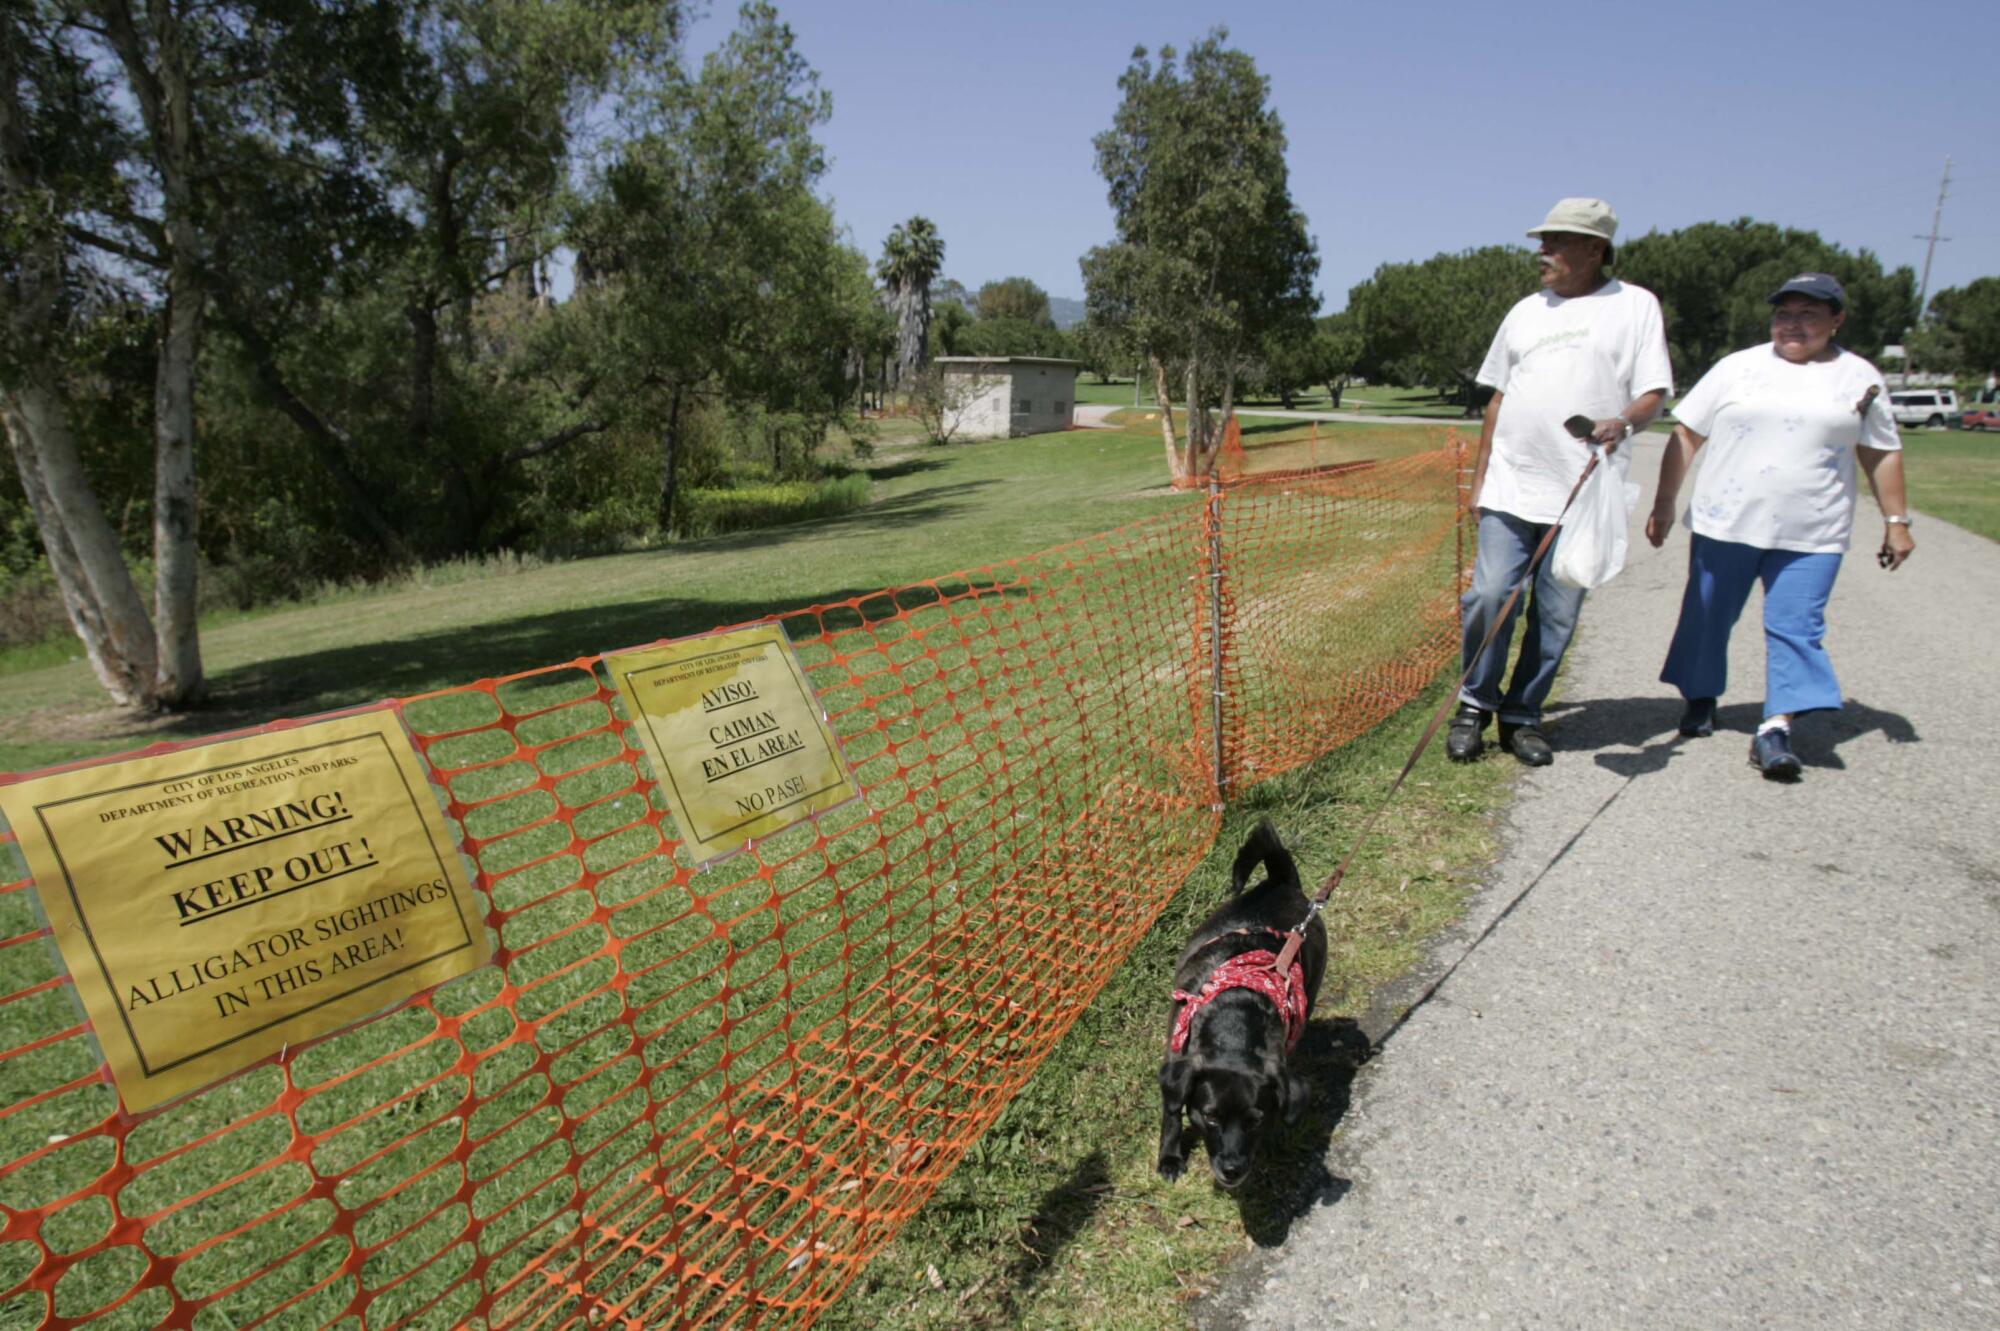 Two people walk a dog near fencing marked with with alligator warnings 